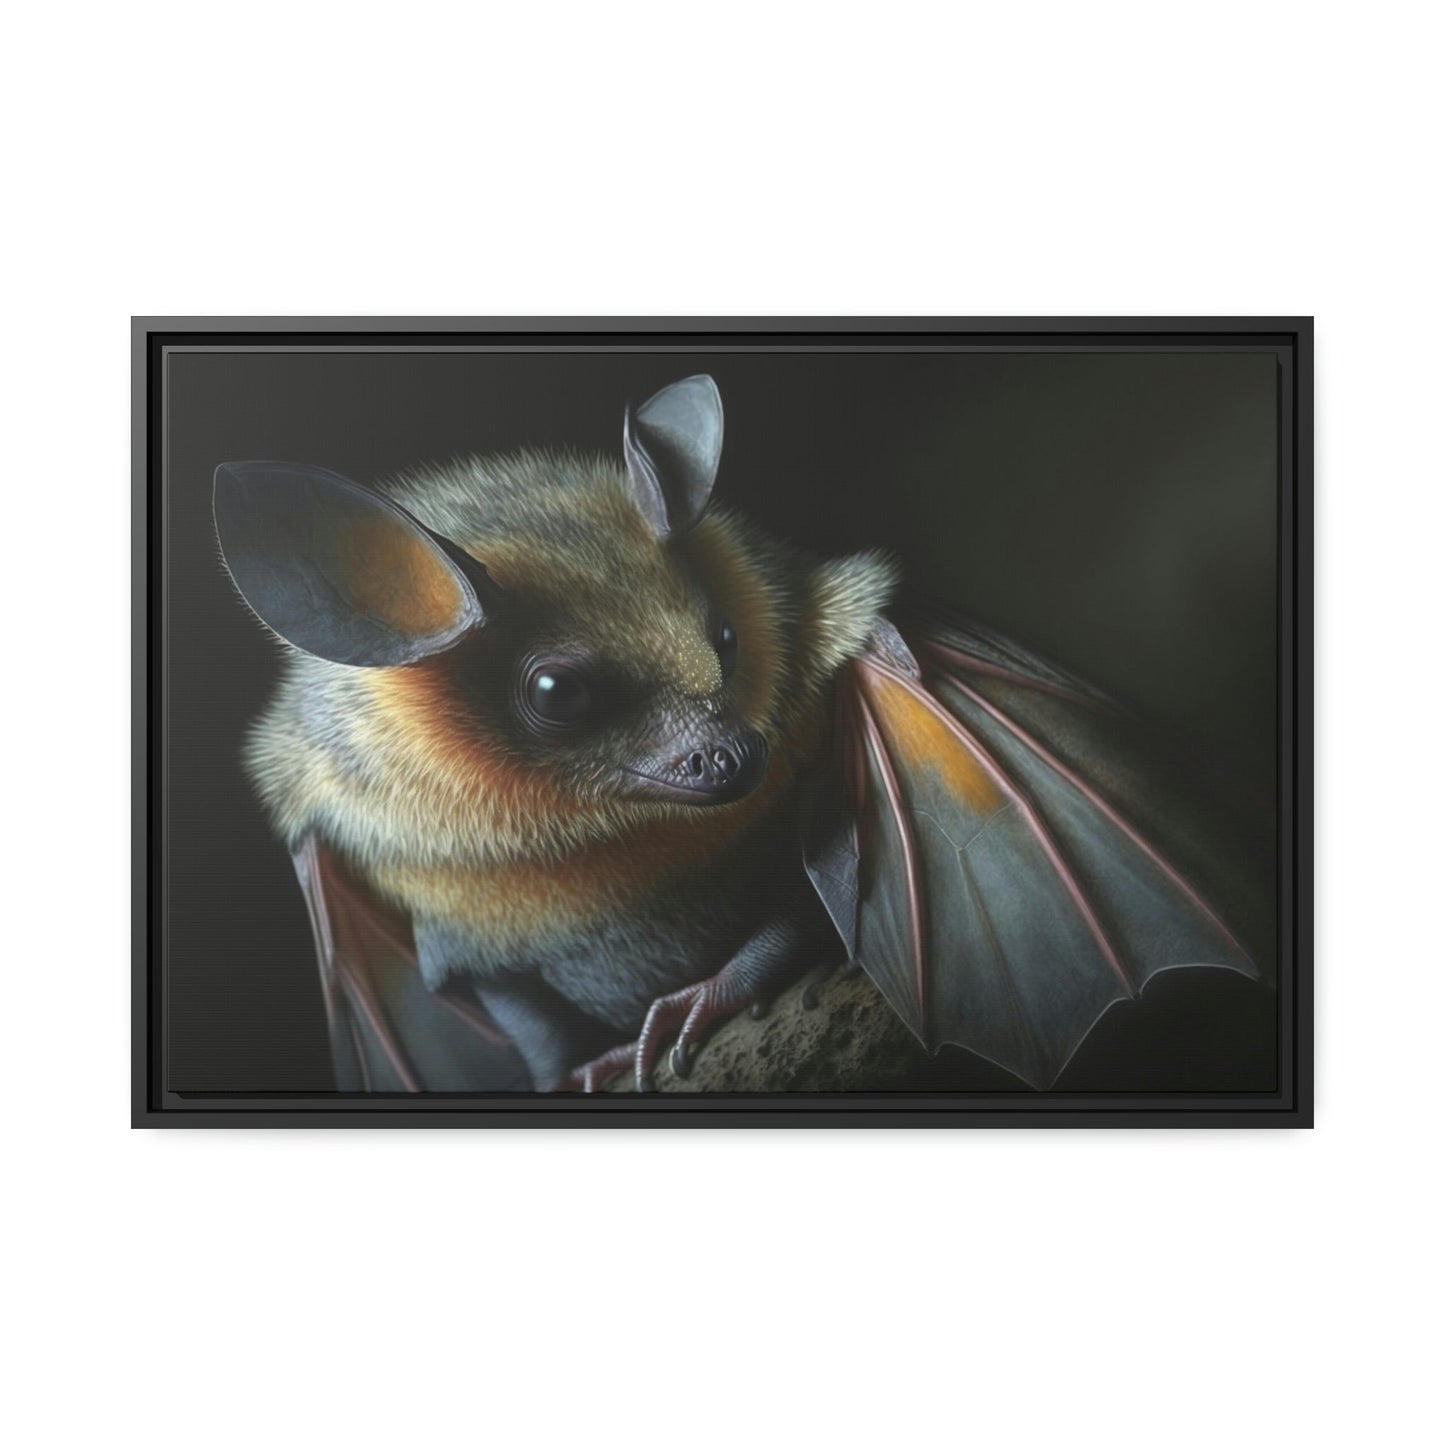 The Elusive Hunter: Framed Canvas & Poster Print of a Bat in Action